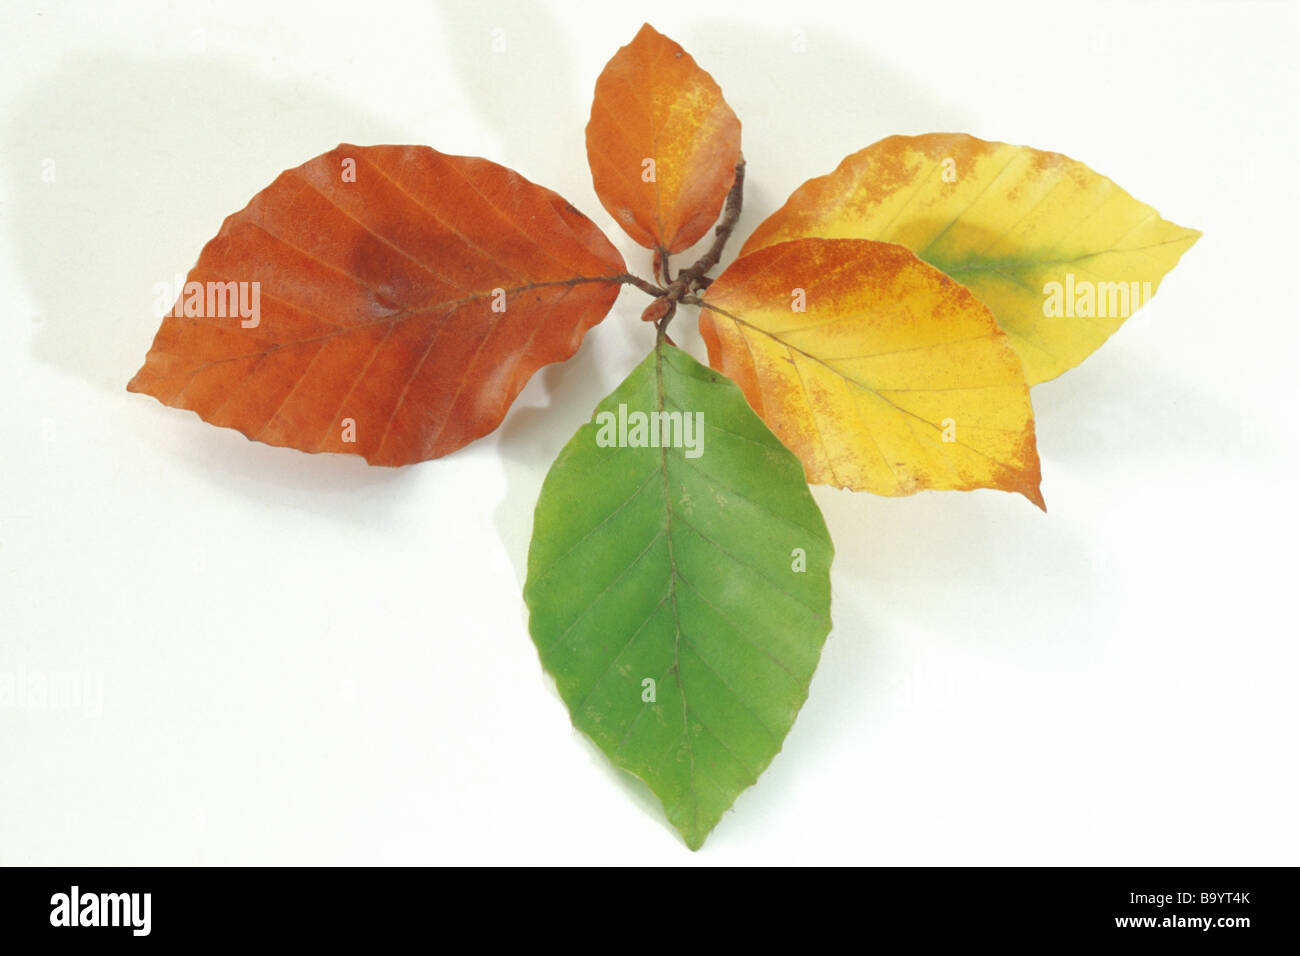 Common Beech, European Beech (Fagus sylvatica), leaves of different color on a twig, studio picture Stock Photo